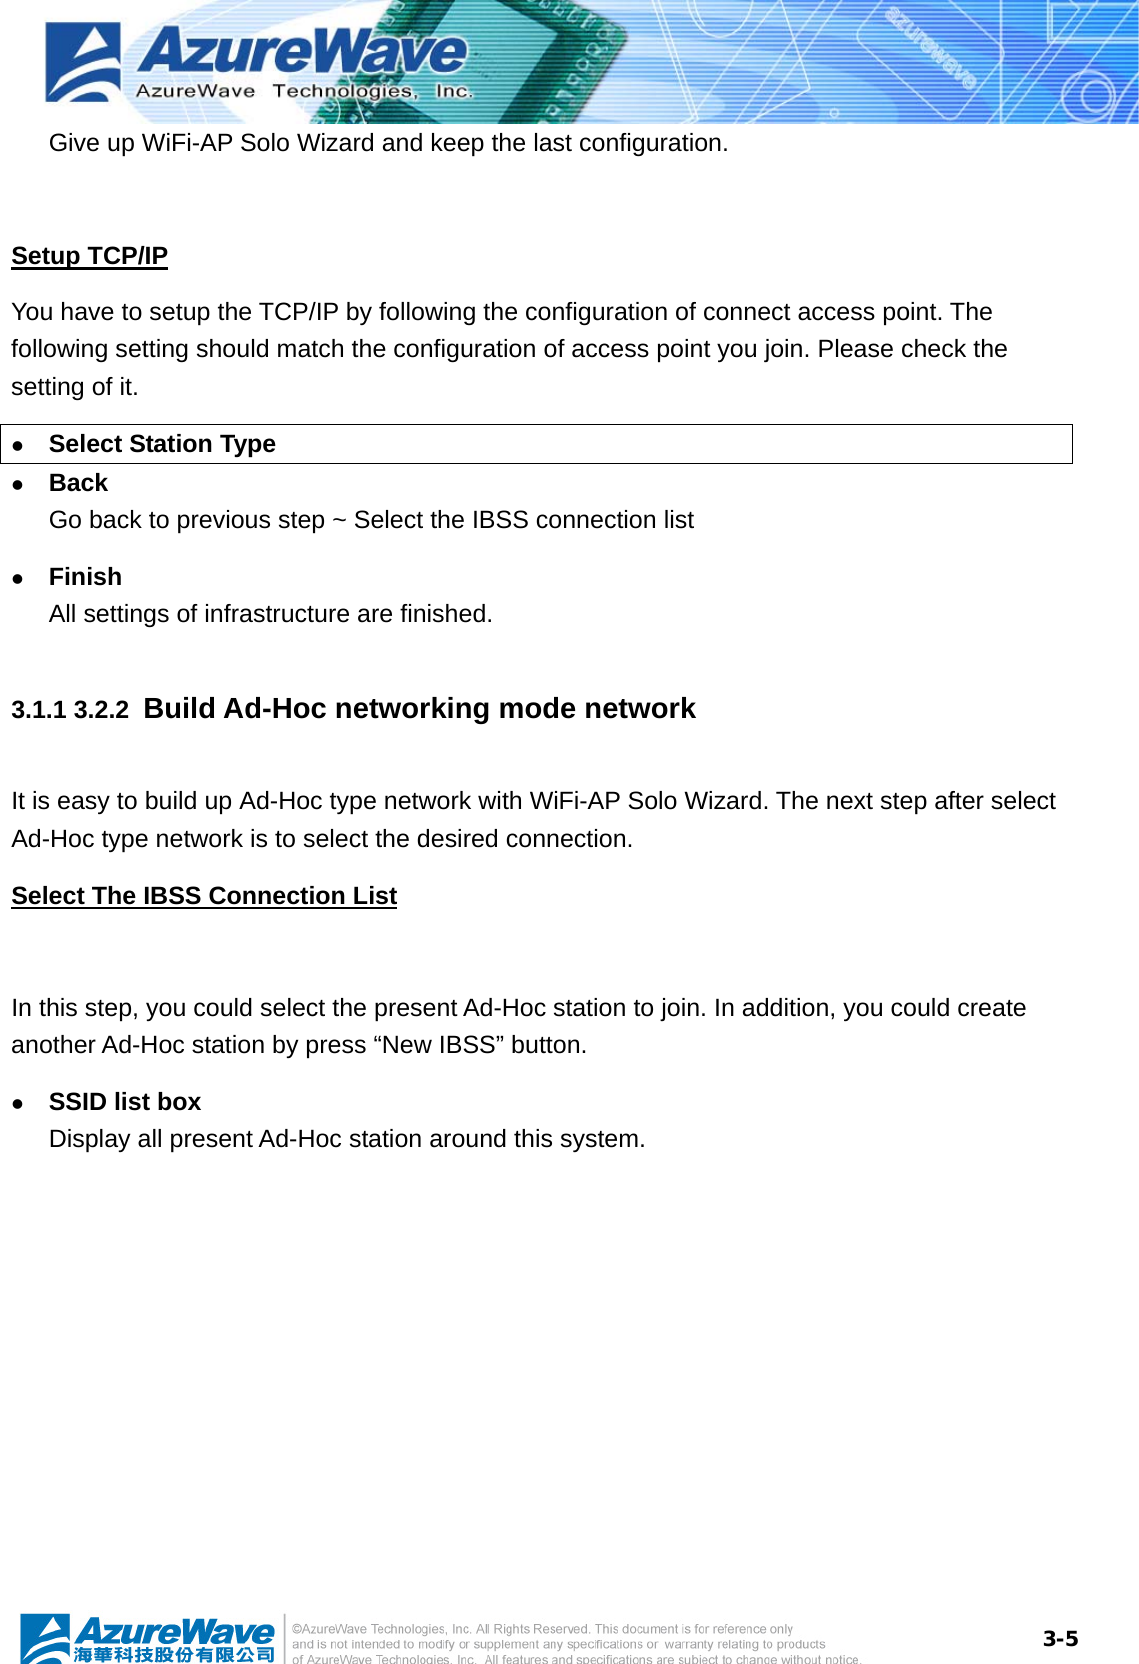  3-5Give up WiFi-AP Solo Wizard and keep the last configuration.  Setup TCP/IP You have to setup the TCP/IP by following the configuration of connect access point. The following setting should match the configuration of access point you join. Please check the setting of it. z Select Station Type z Back Go back to previous step ~ Select the IBSS connection list z Finish All settings of infrastructure are finished. 3.1.1 3.2.2  Build Ad-Hoc networking mode network It is easy to build up Ad-Hoc type network with WiFi-AP Solo Wizard. The next step after select Ad-Hoc type network is to select the desired connection. Select The IBSS Connection List  In this step, you could select the present Ad-Hoc station to join. In addition, you could create another Ad-Hoc station by press “New IBSS” button. z SSID list box Display all present Ad-Hoc station around this system. 